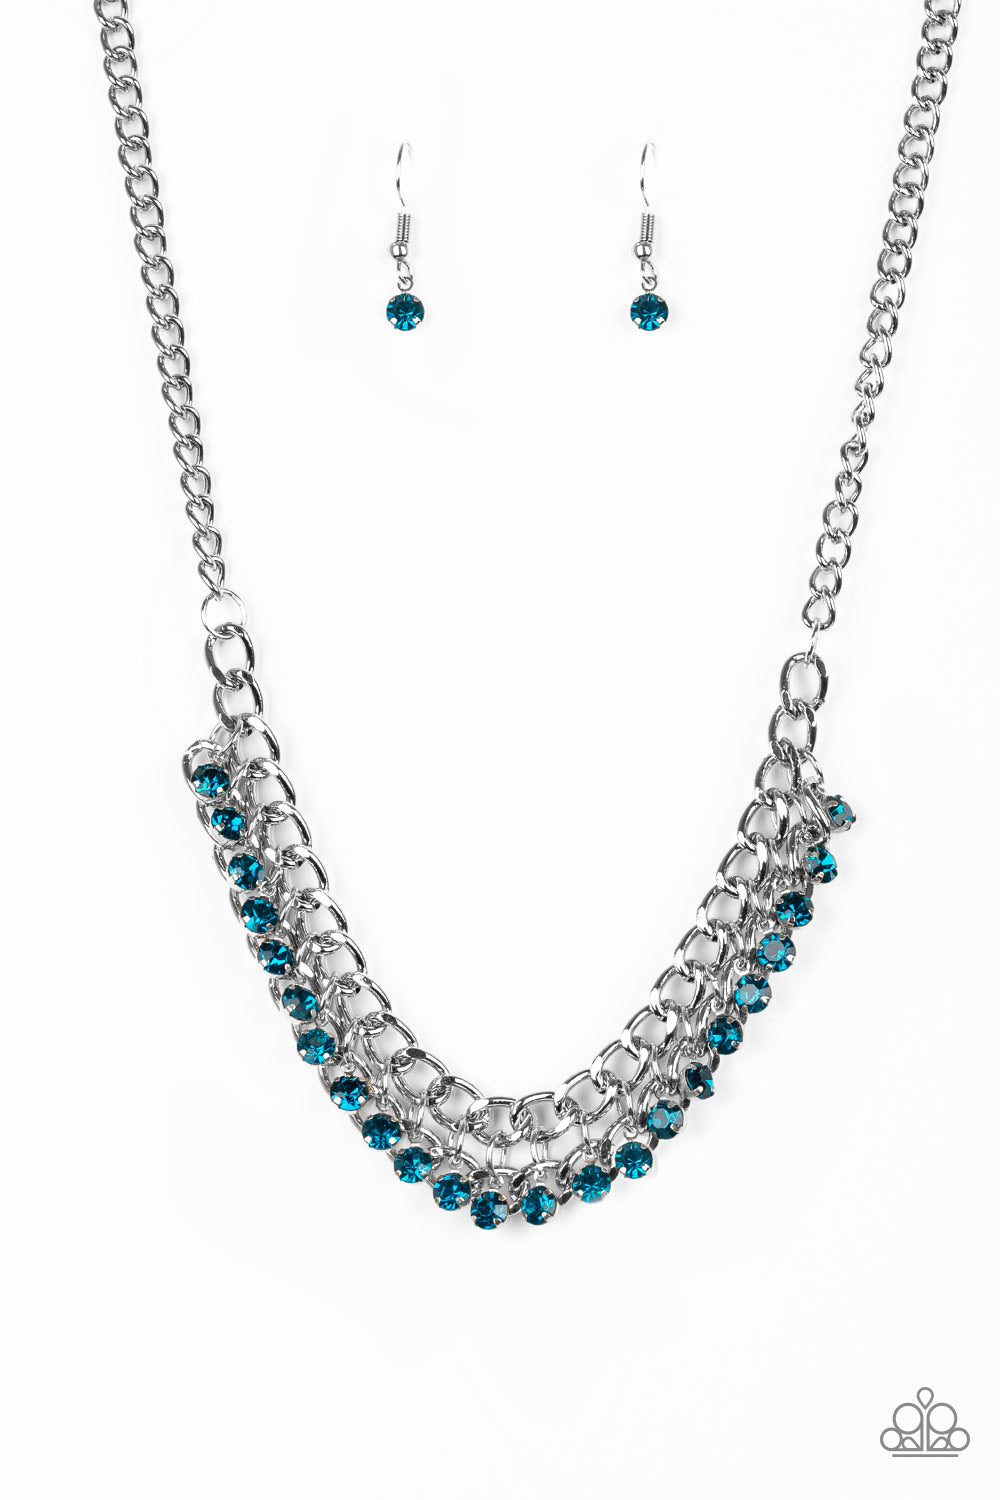 Front and CENTERED - Blue Rhinestone Necklace - Chic Jewelry Boutique